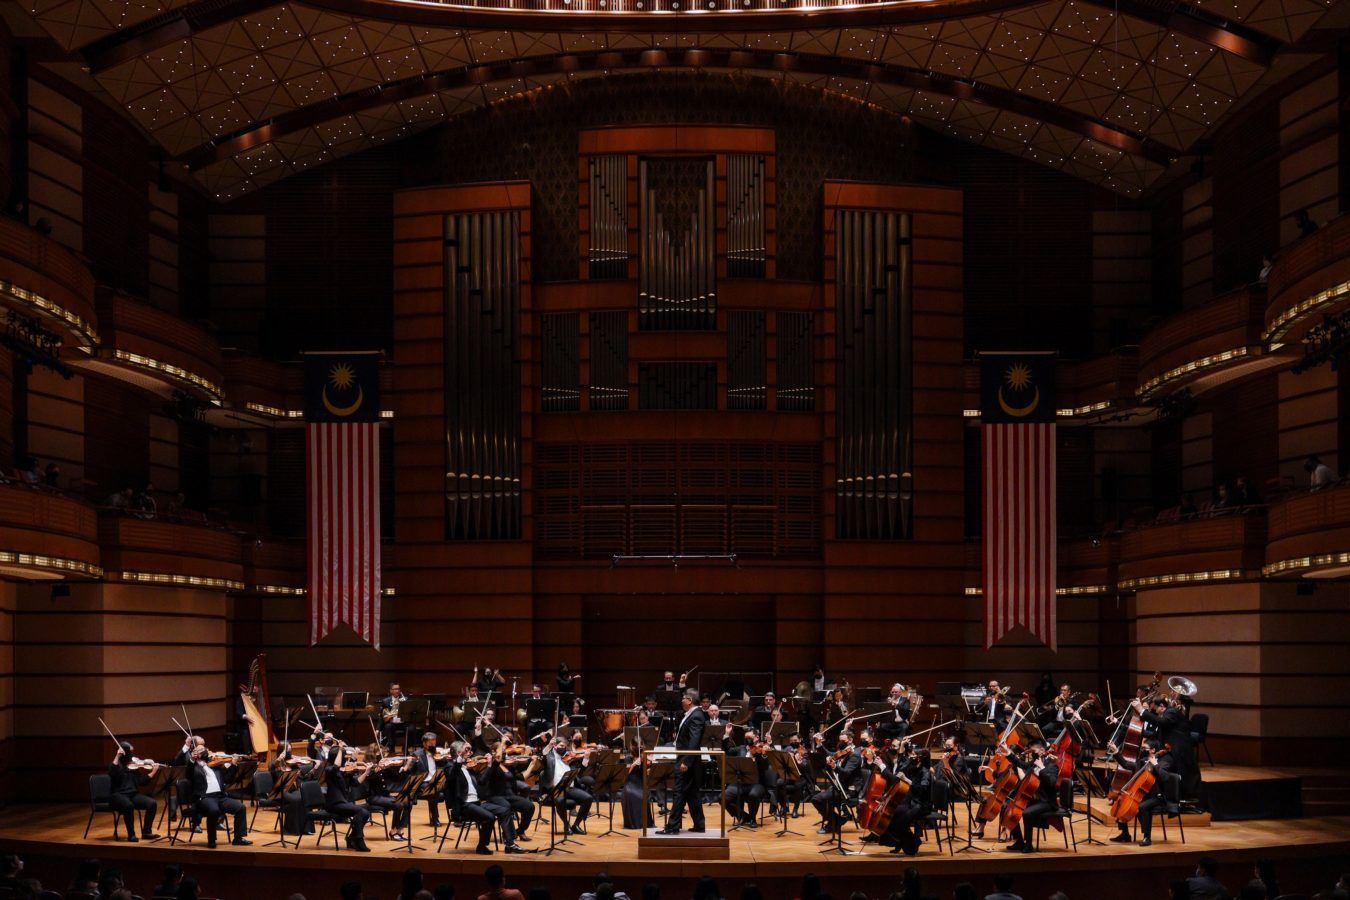 The Malaysian Philharmonic Orchestra rings in Raya 2022 with a special concert